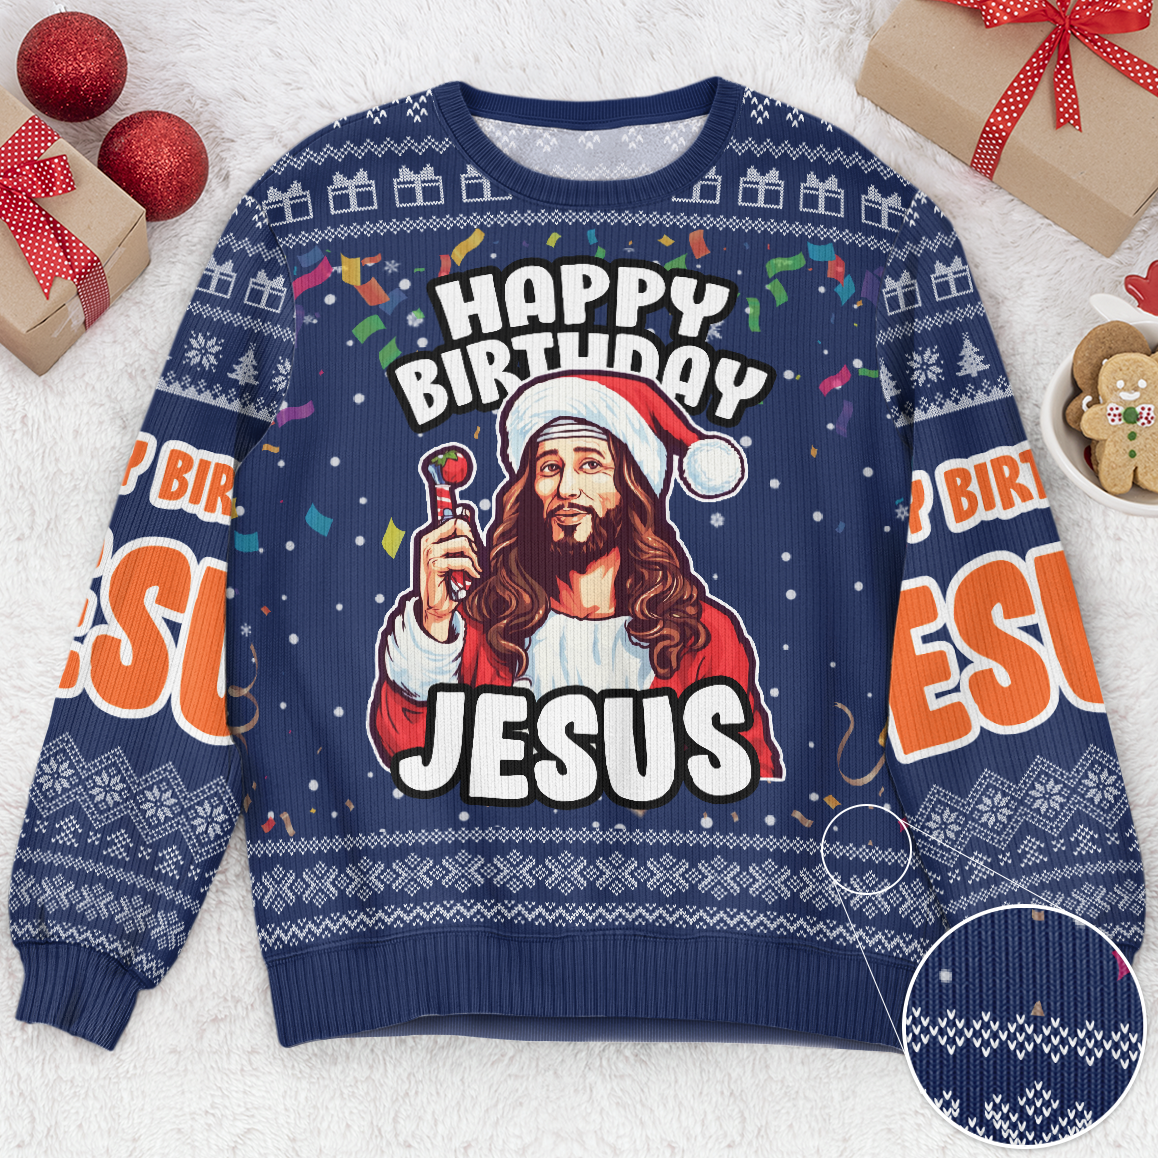 Go Jesus It's Your Birthday - Personalized Ugly Sweater